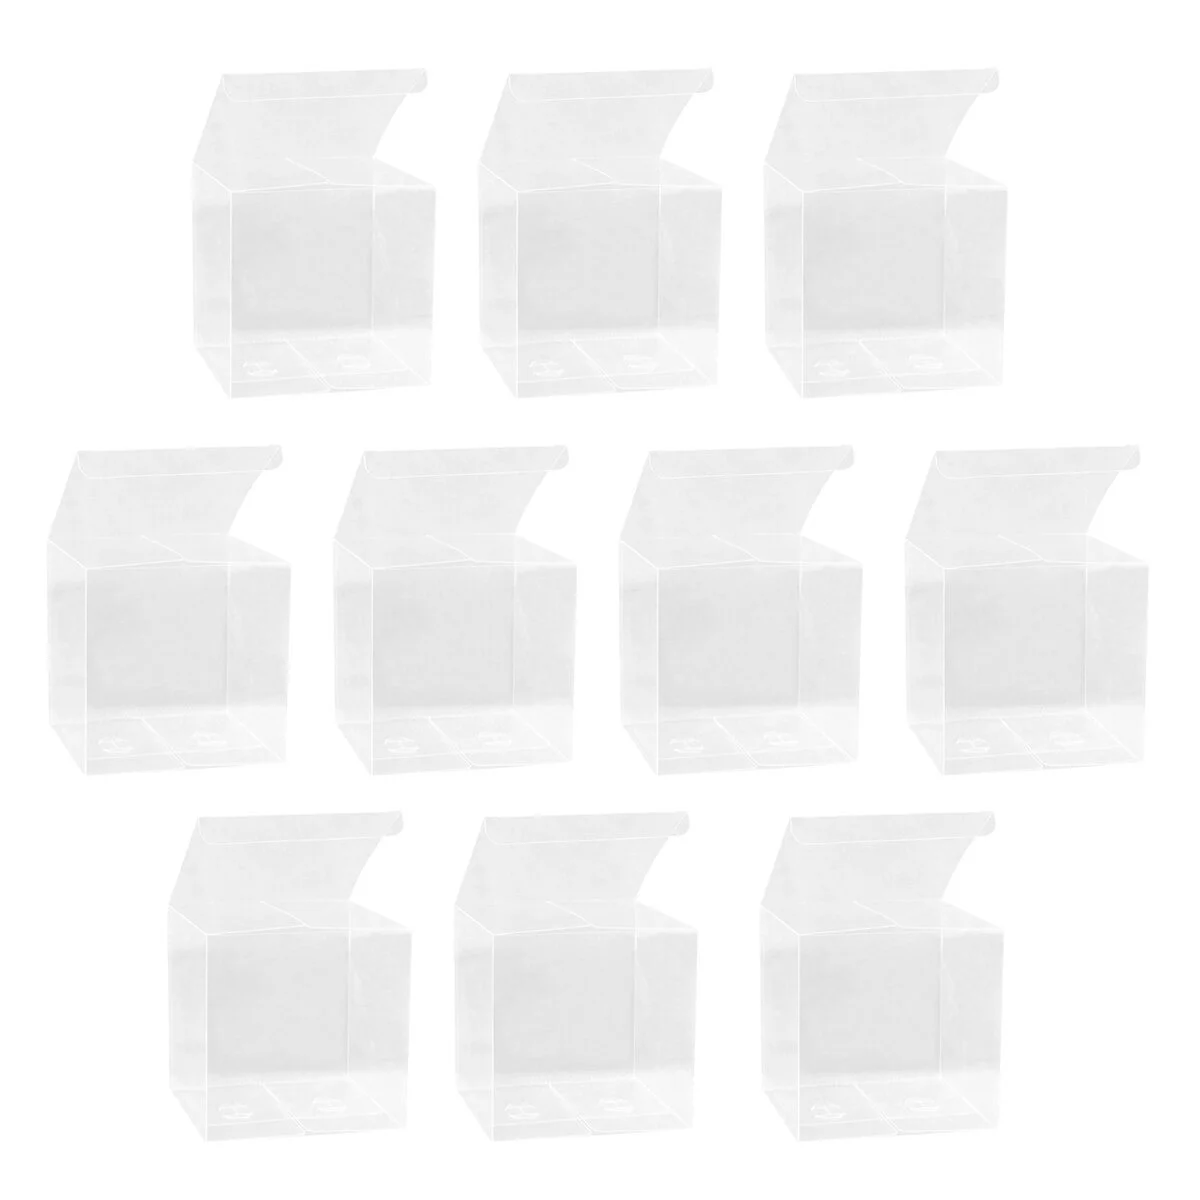 

10 Clear Cake Boxes Bakery Containers Transparent Boxes Candy Box Cake Container Cupcake Case for Pastries Pie Cupcakes